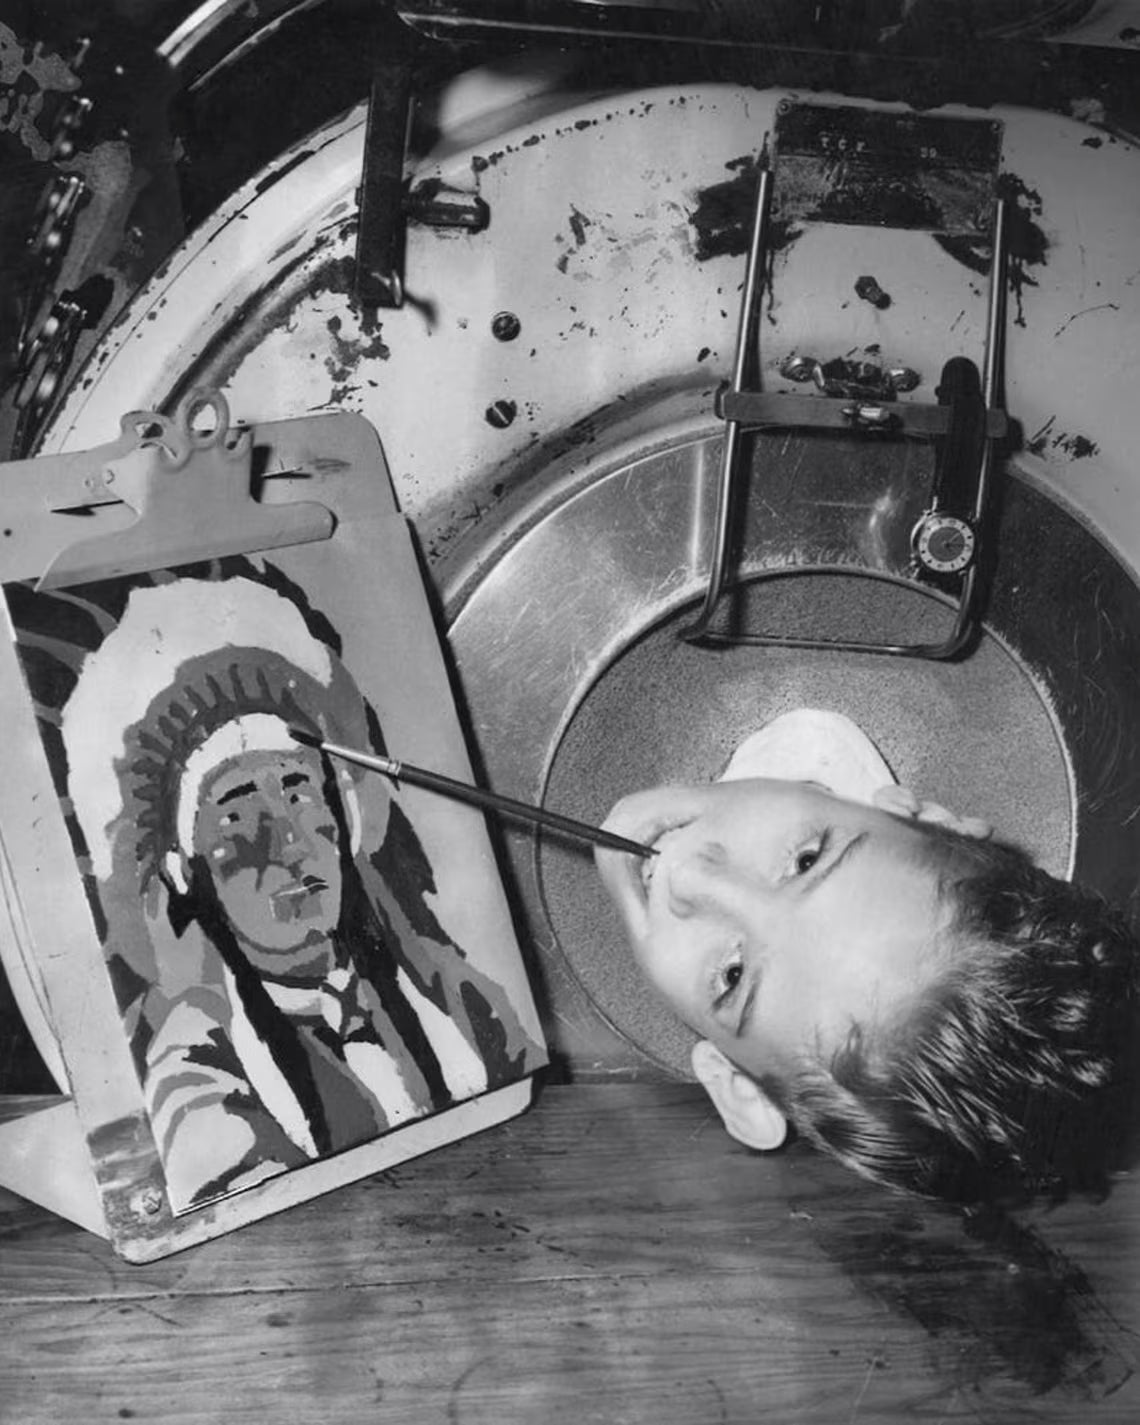 Paul Alexander pictured as a young boy, as he learned to paint with his mouth